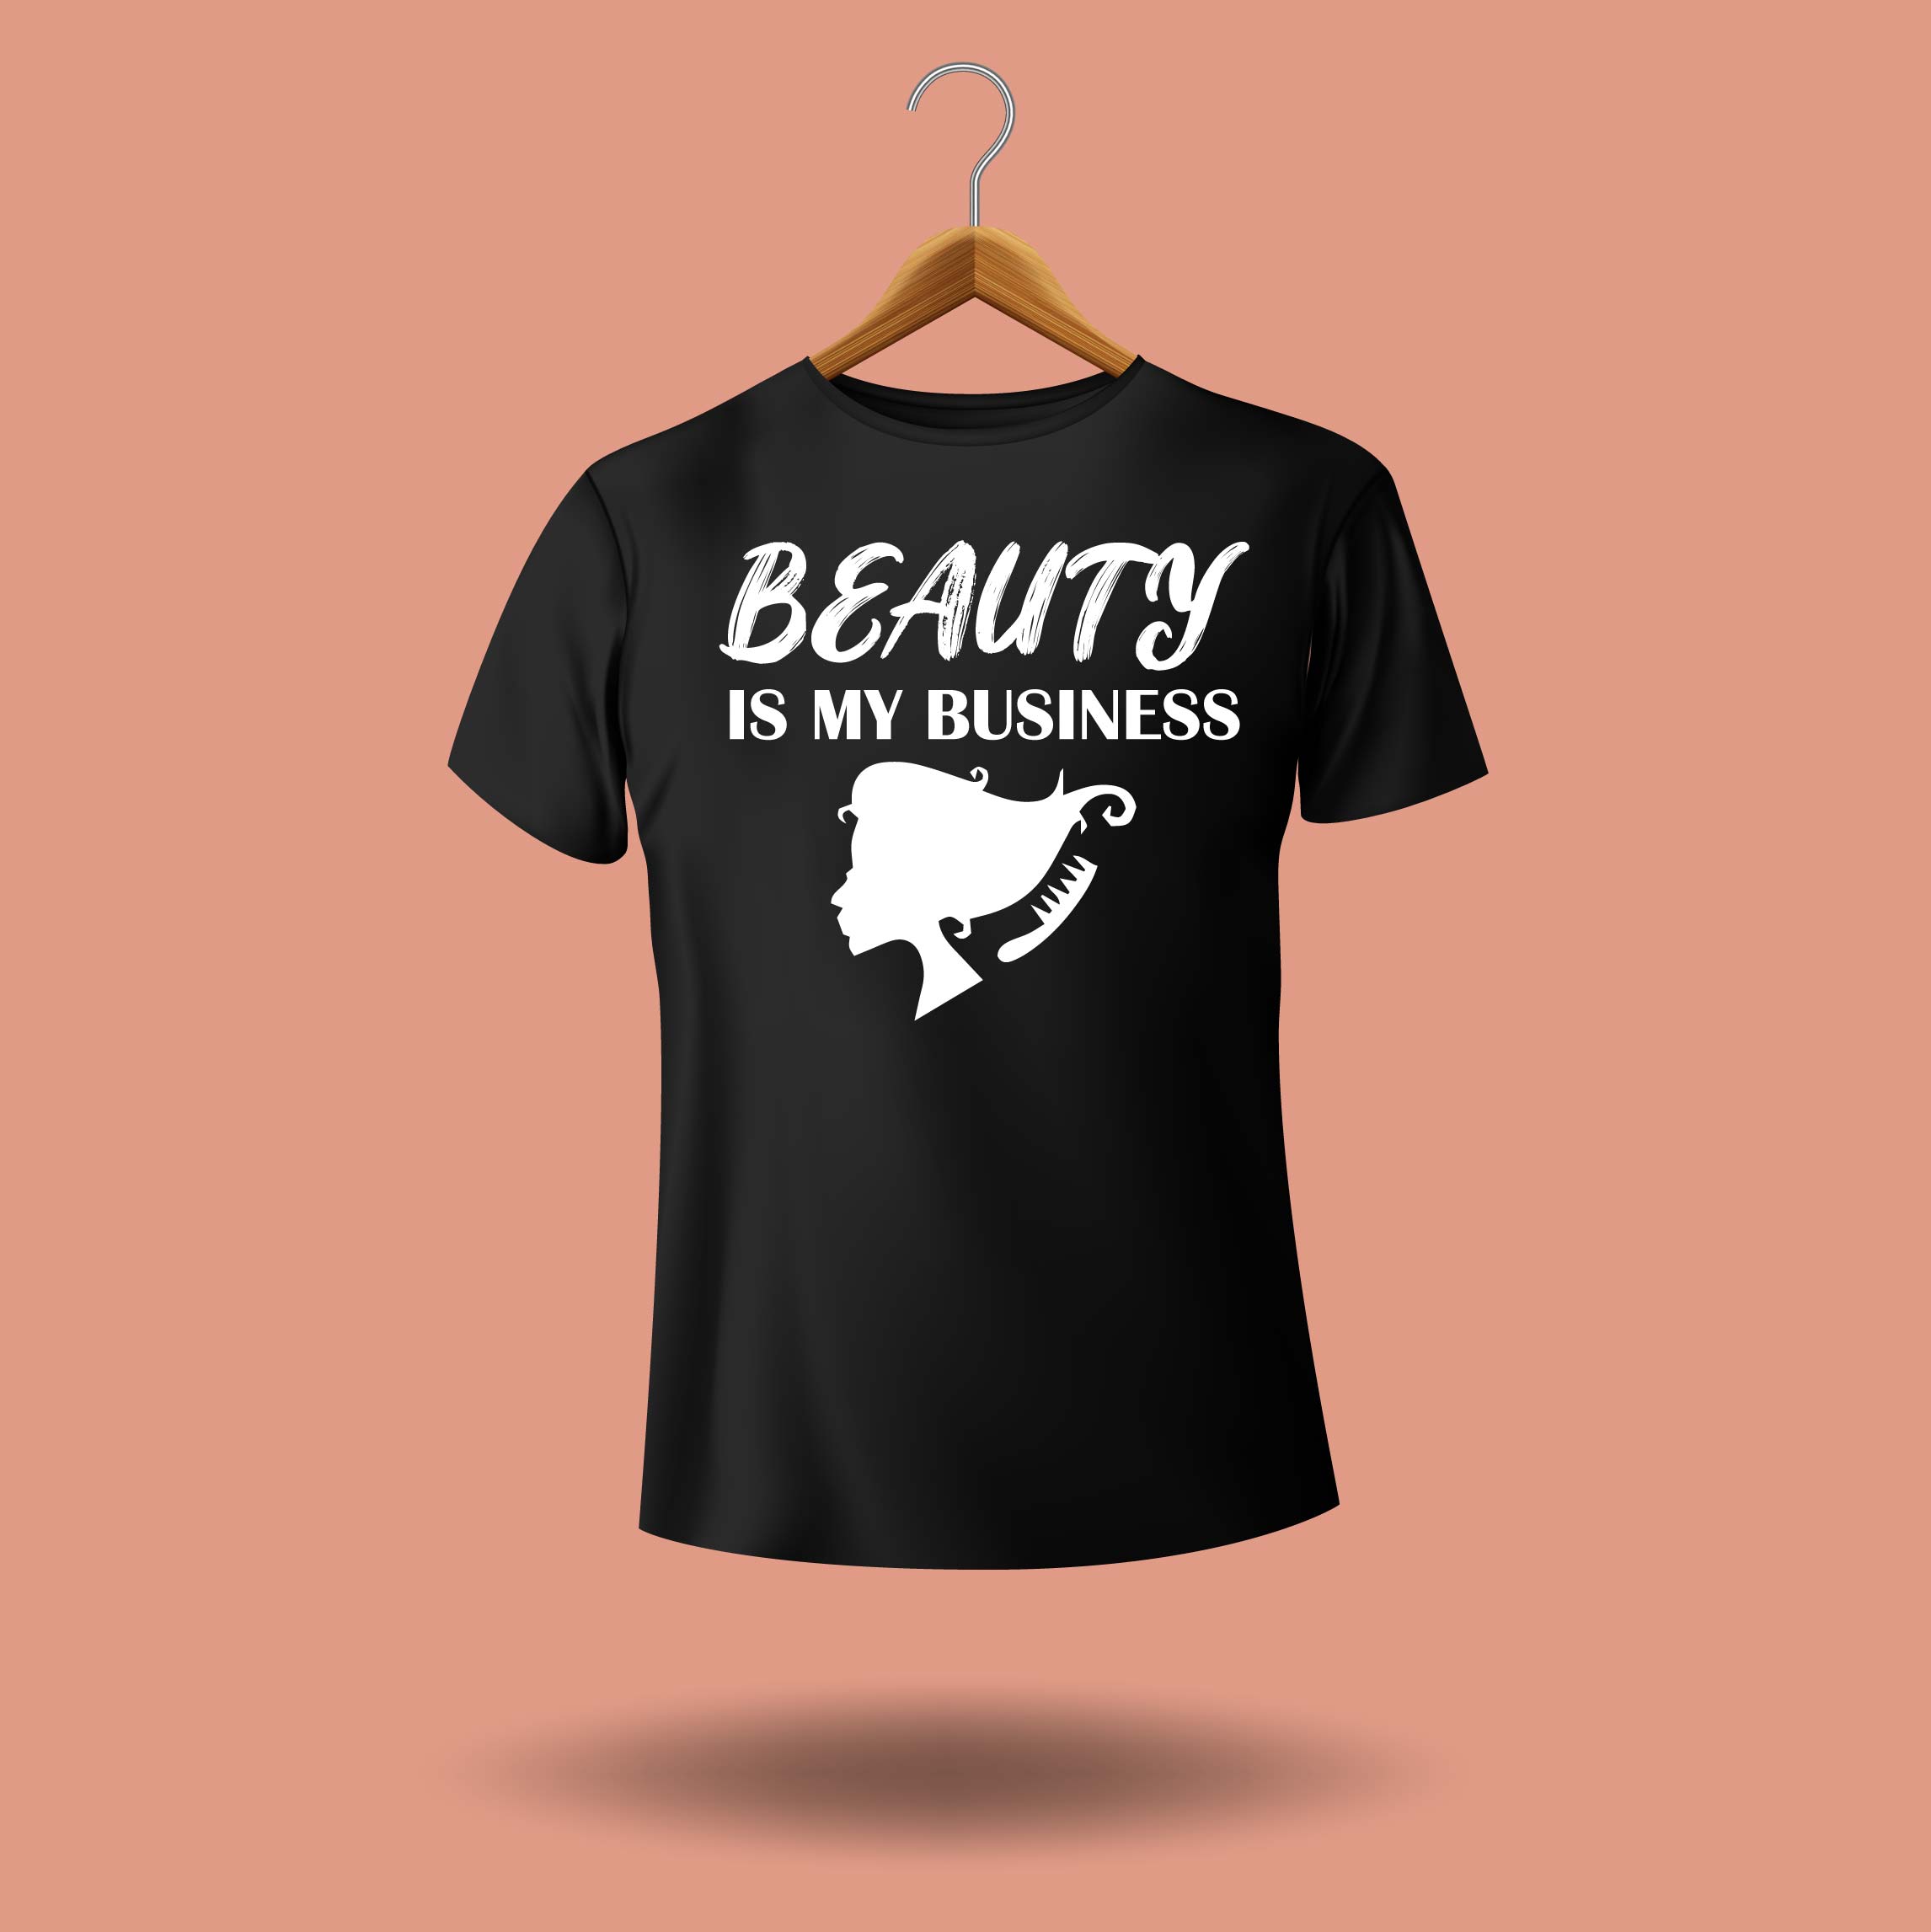 T - shirt that says beauty is my business.